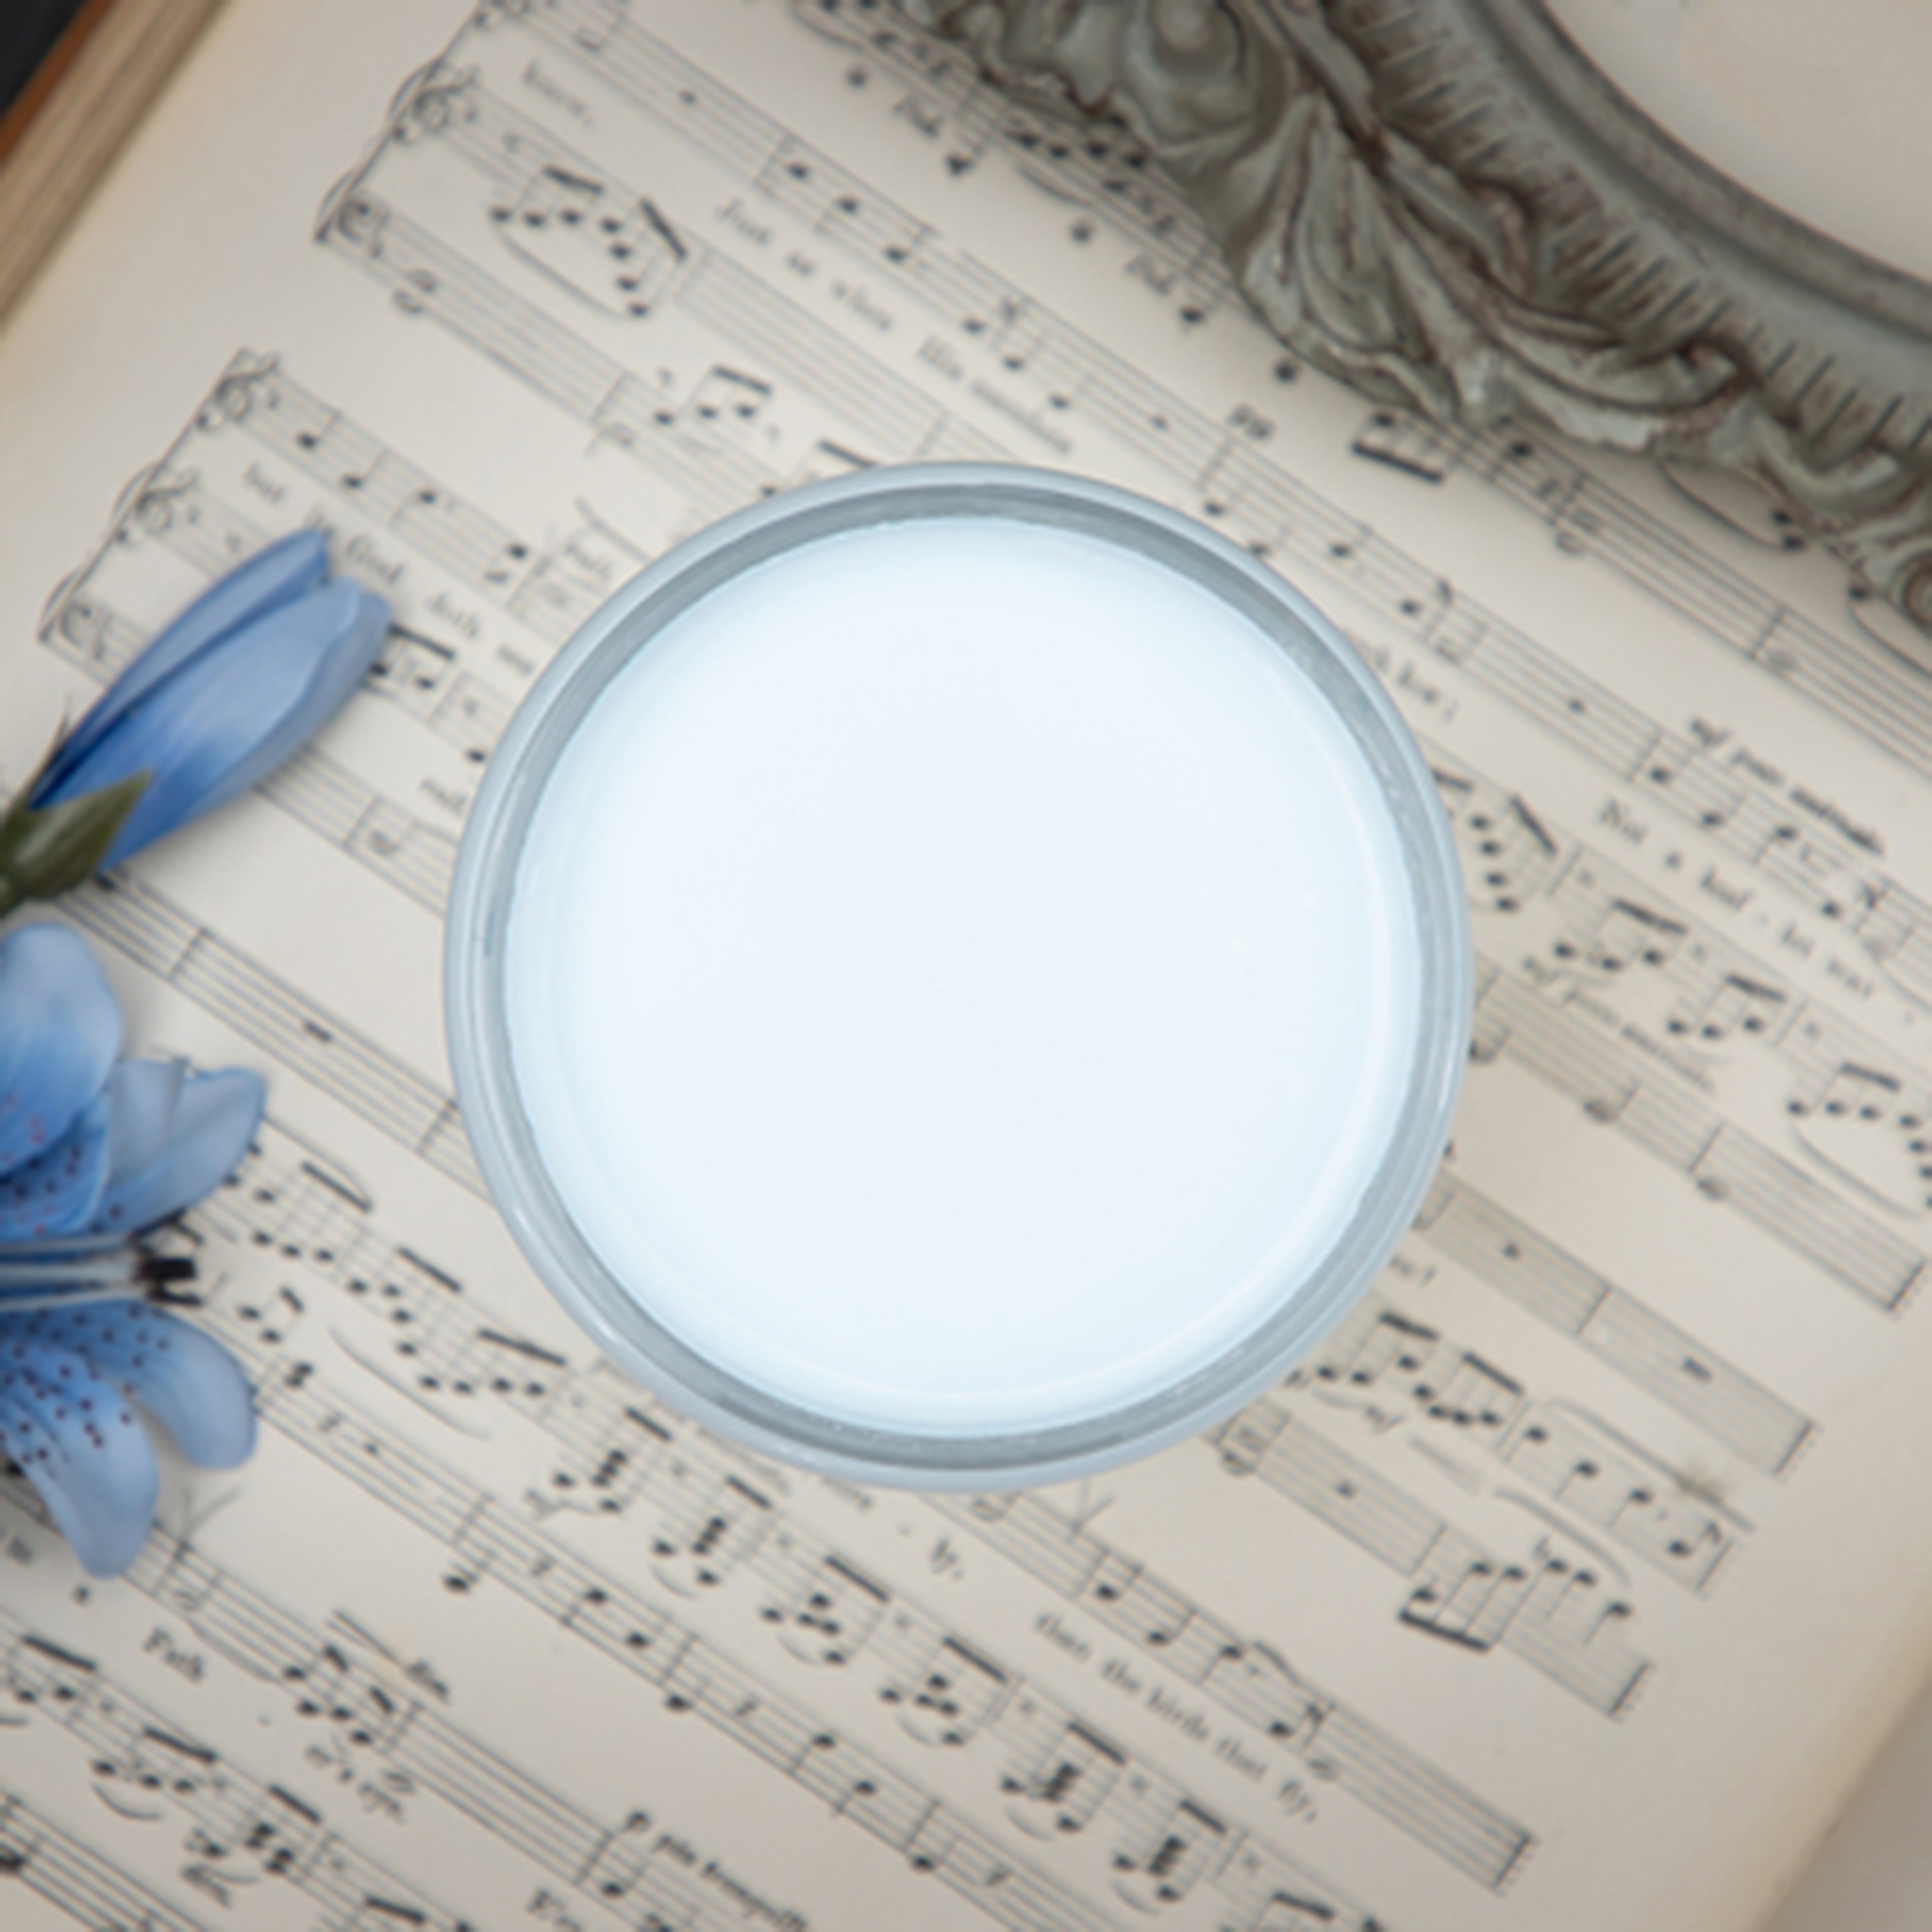 An arial view of an open container of Dixie Belle Paint Company’s Haint Blue Chalk Mineral Paint sits on a book of sheet music.